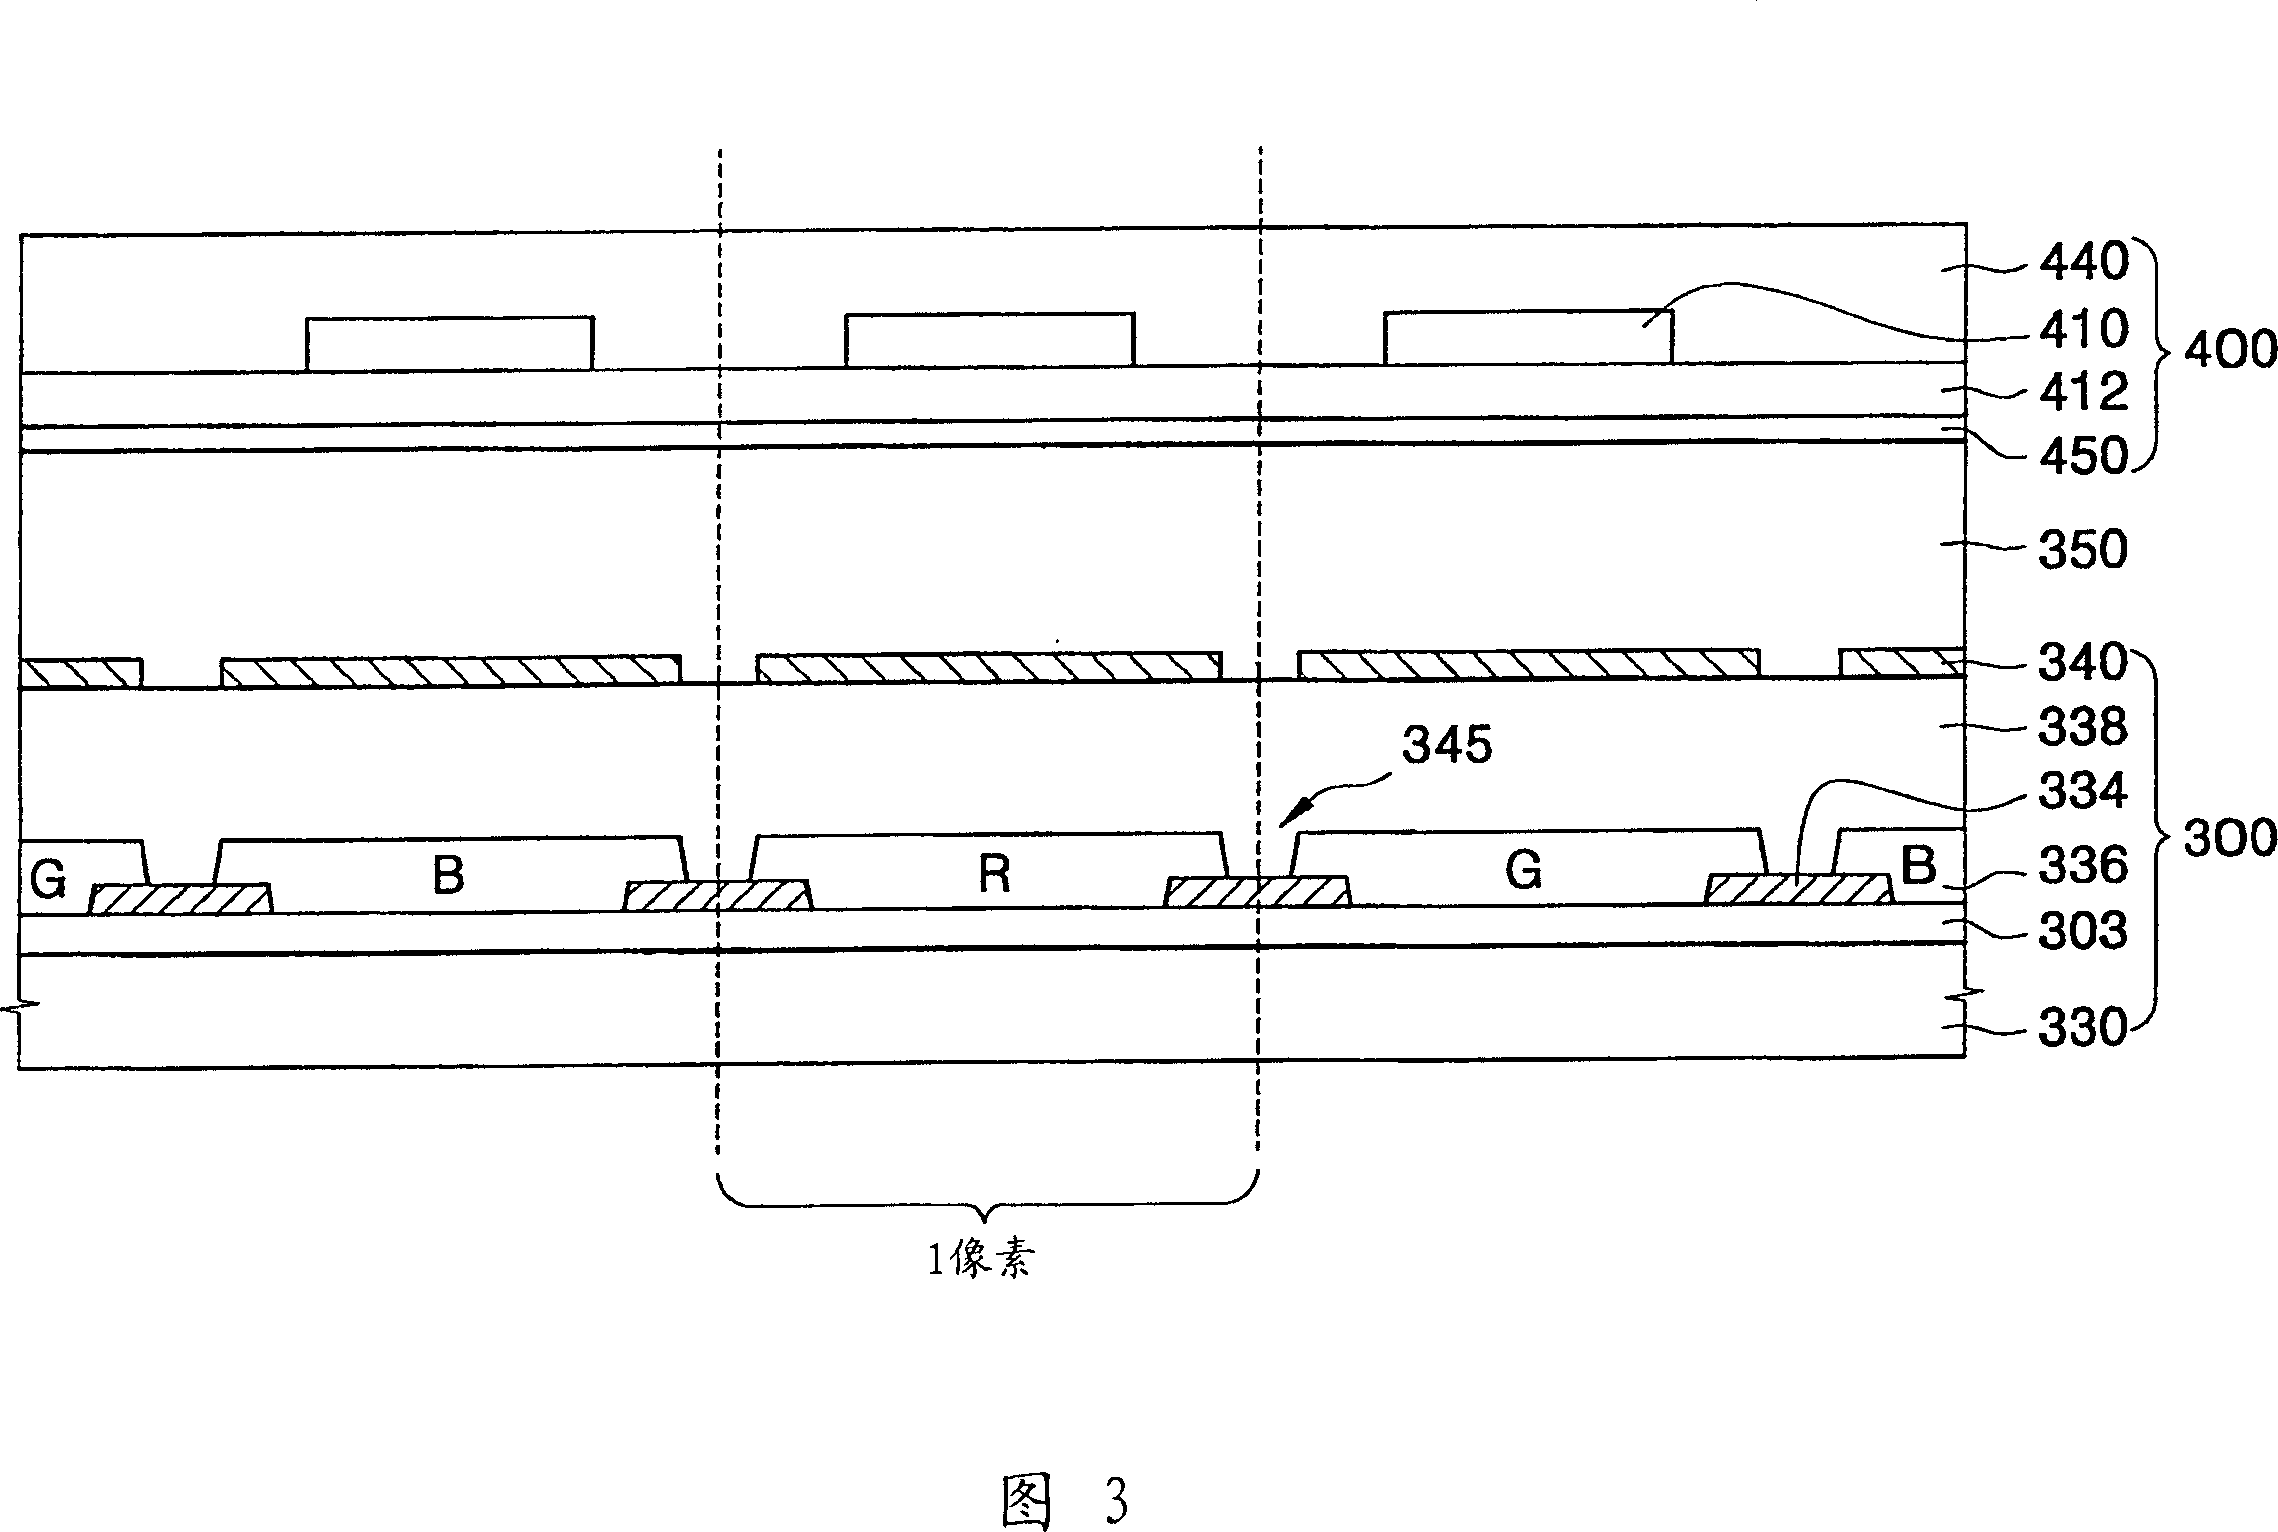 Liquid crystal display device built-in finger printing device and method of manufacturing the same